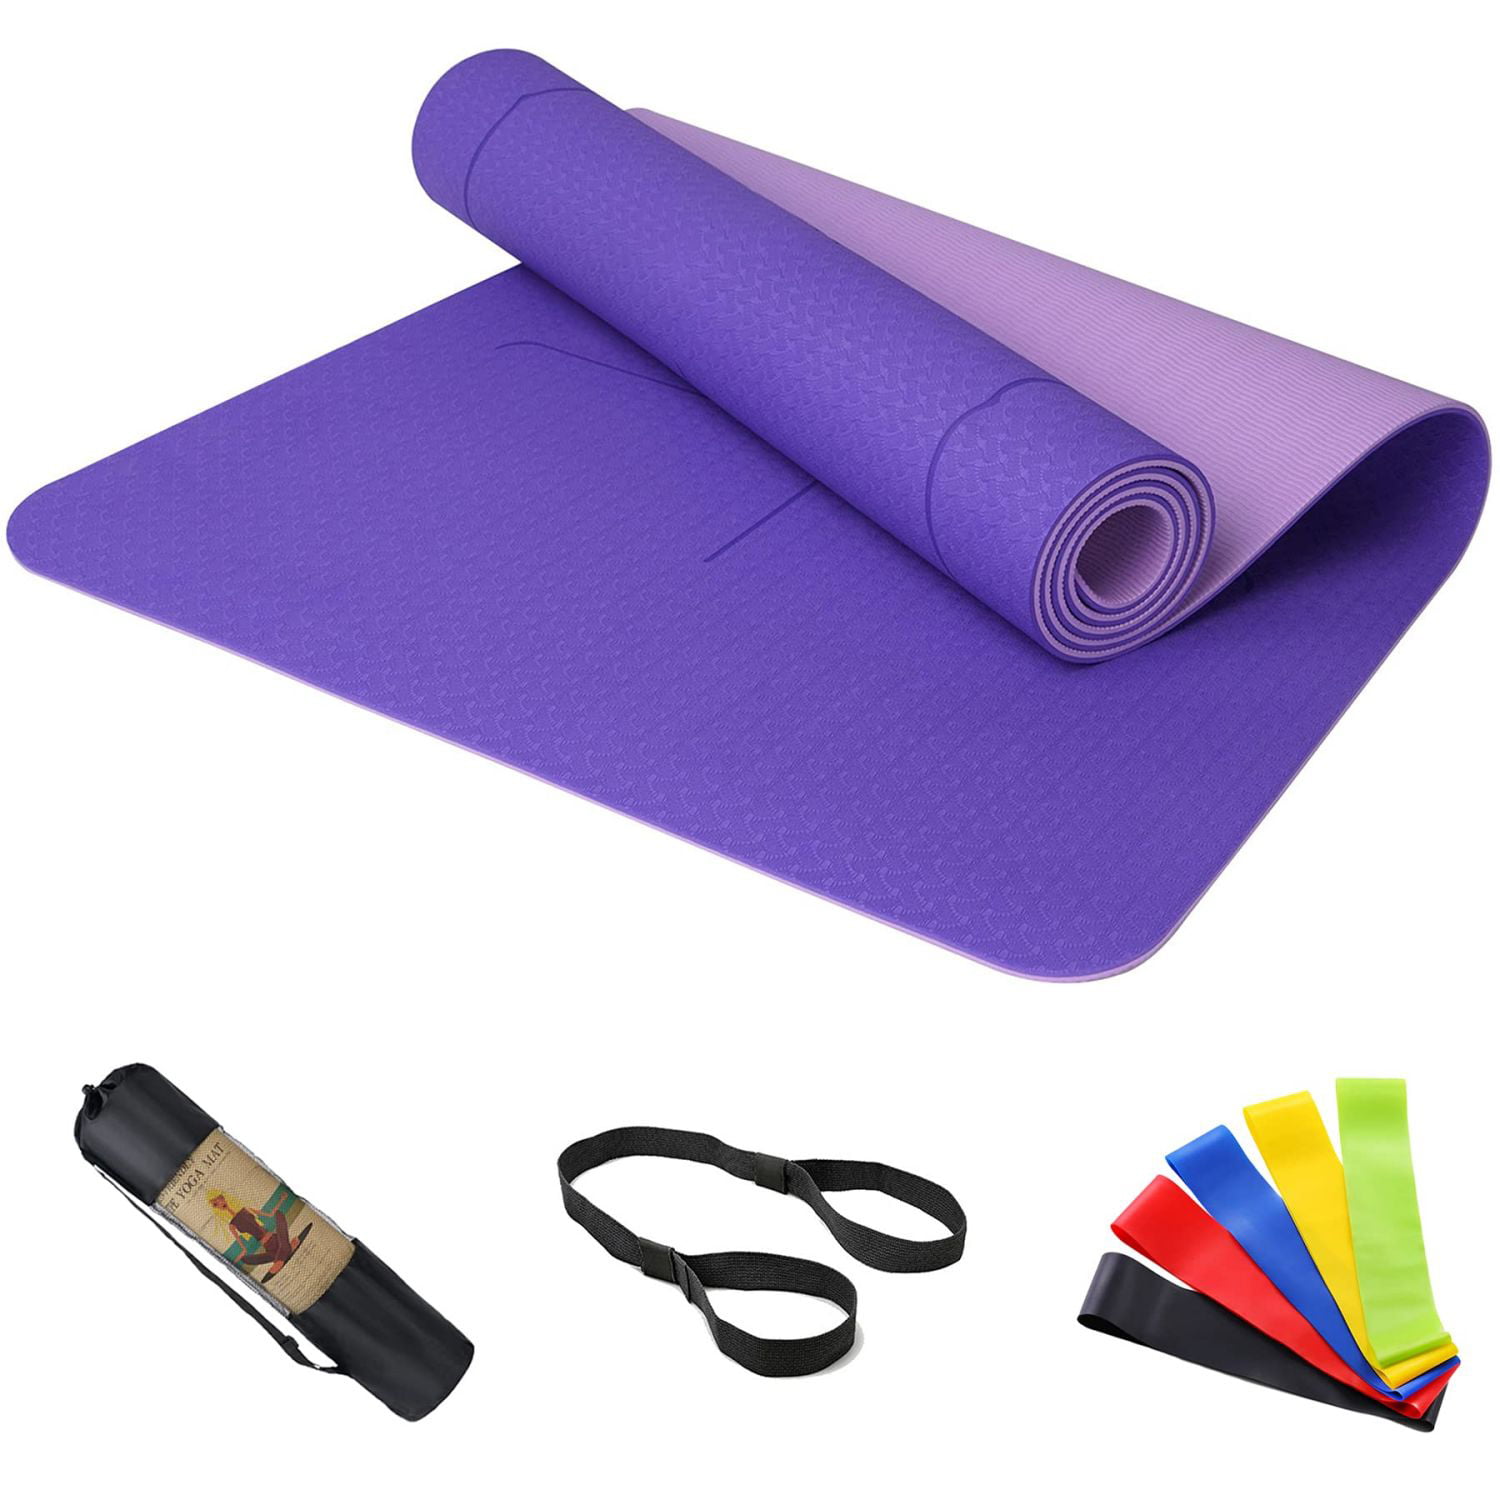 Yoga Mat with Alignment Lines Non Slip Eco Friendly TPE Fitness Exercise Carpet 